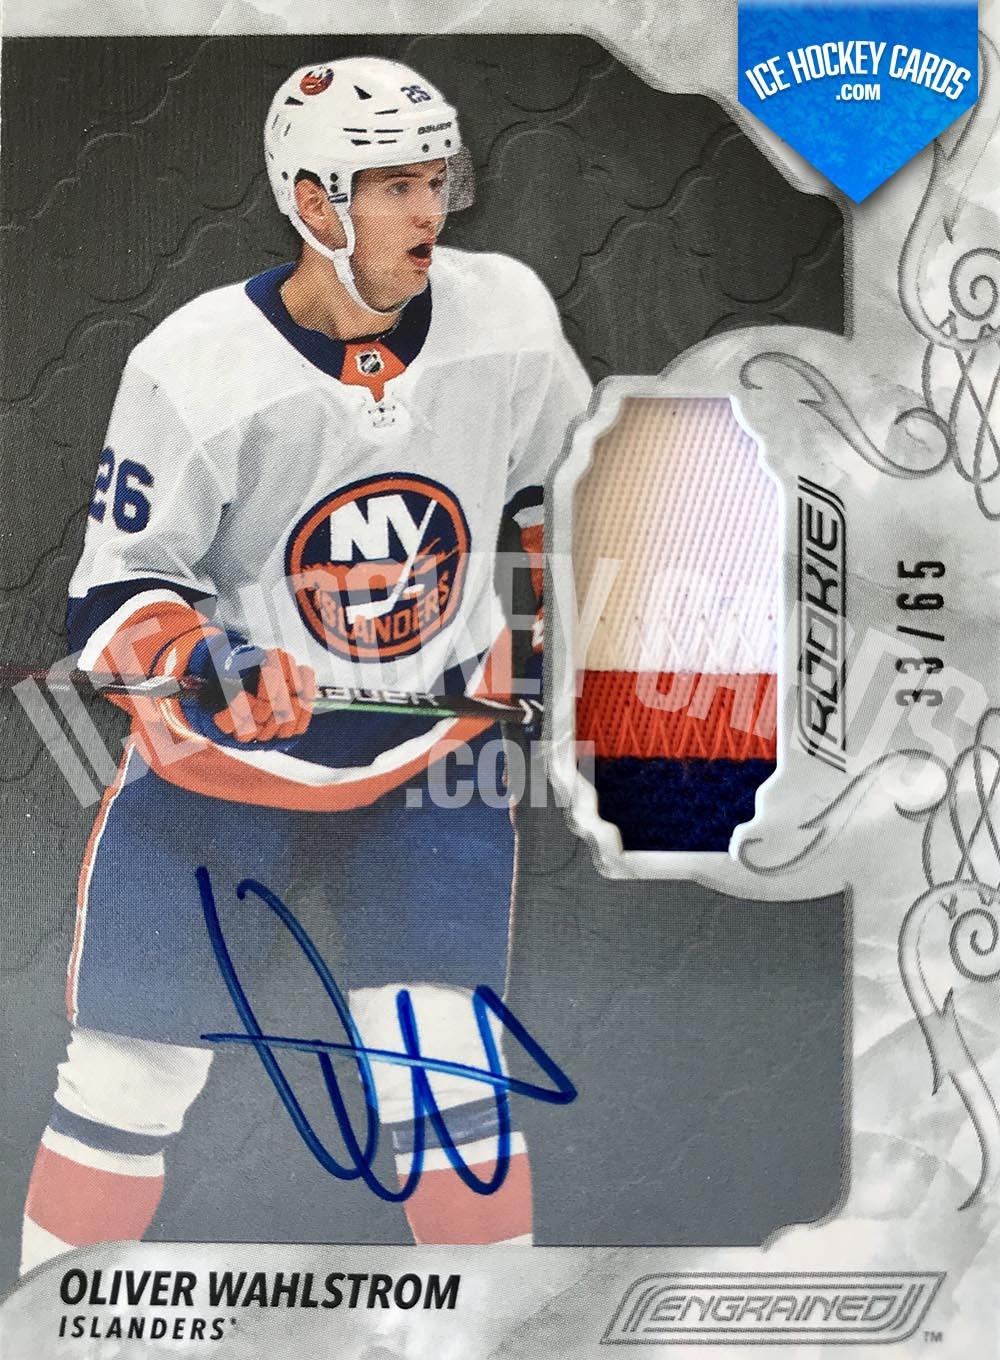 Upper Deck - Engrained 2019-20 - Oliver Wahlstrom Rookie Auto Patch Card # to 65